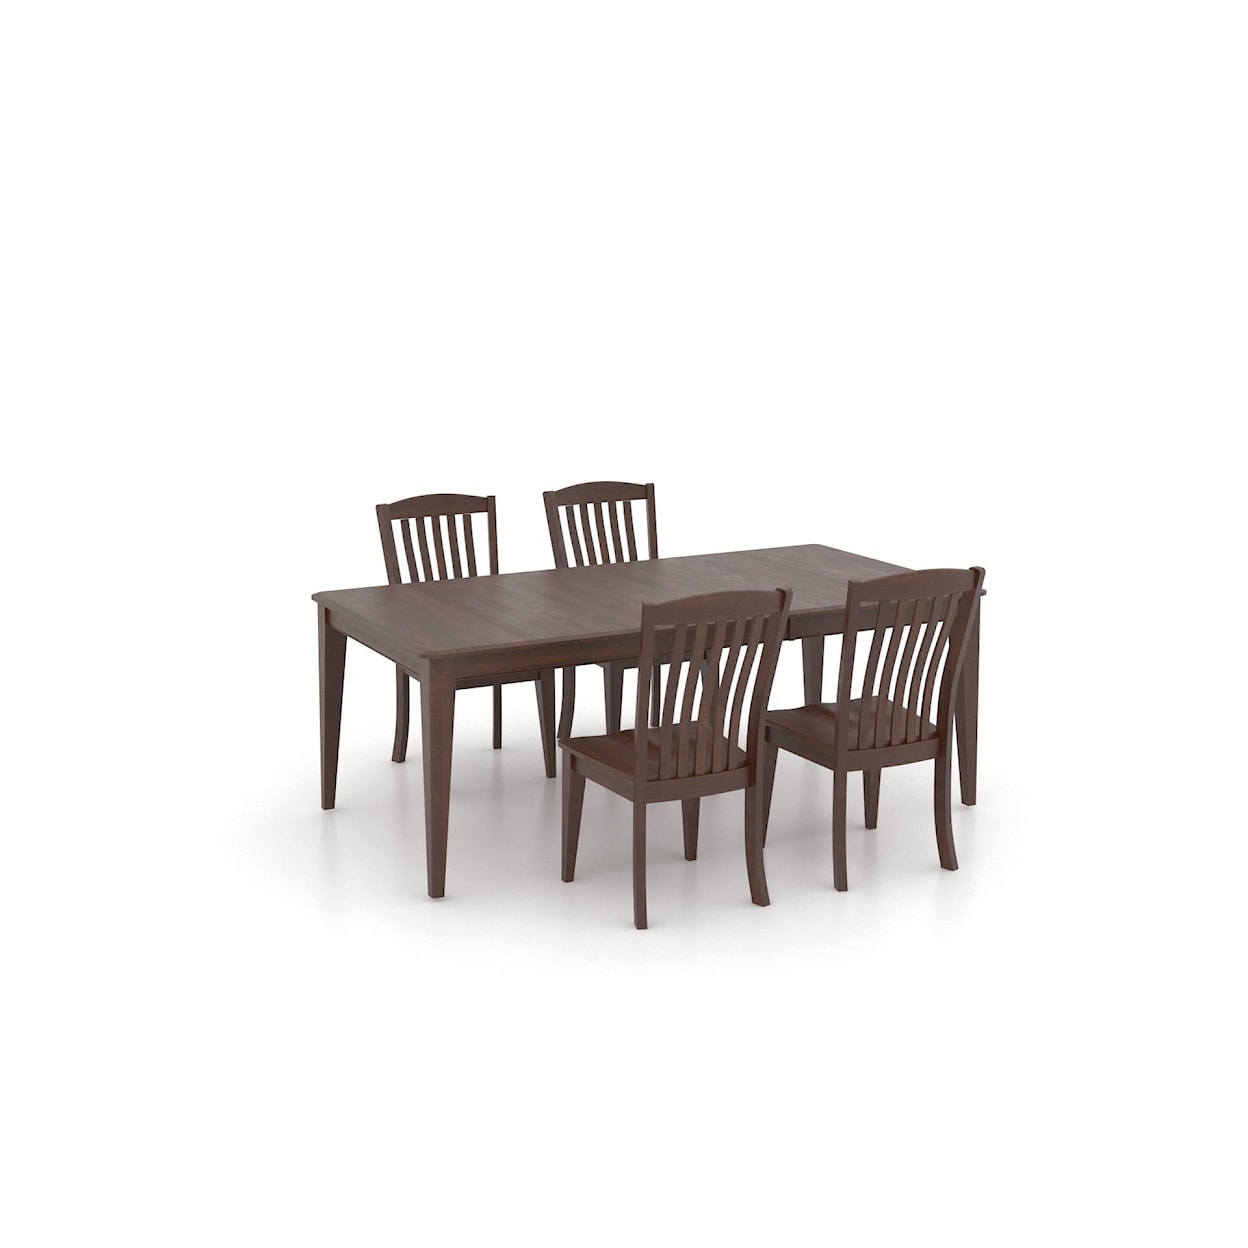 Canadel Gourmet 5 Pc Dining Set